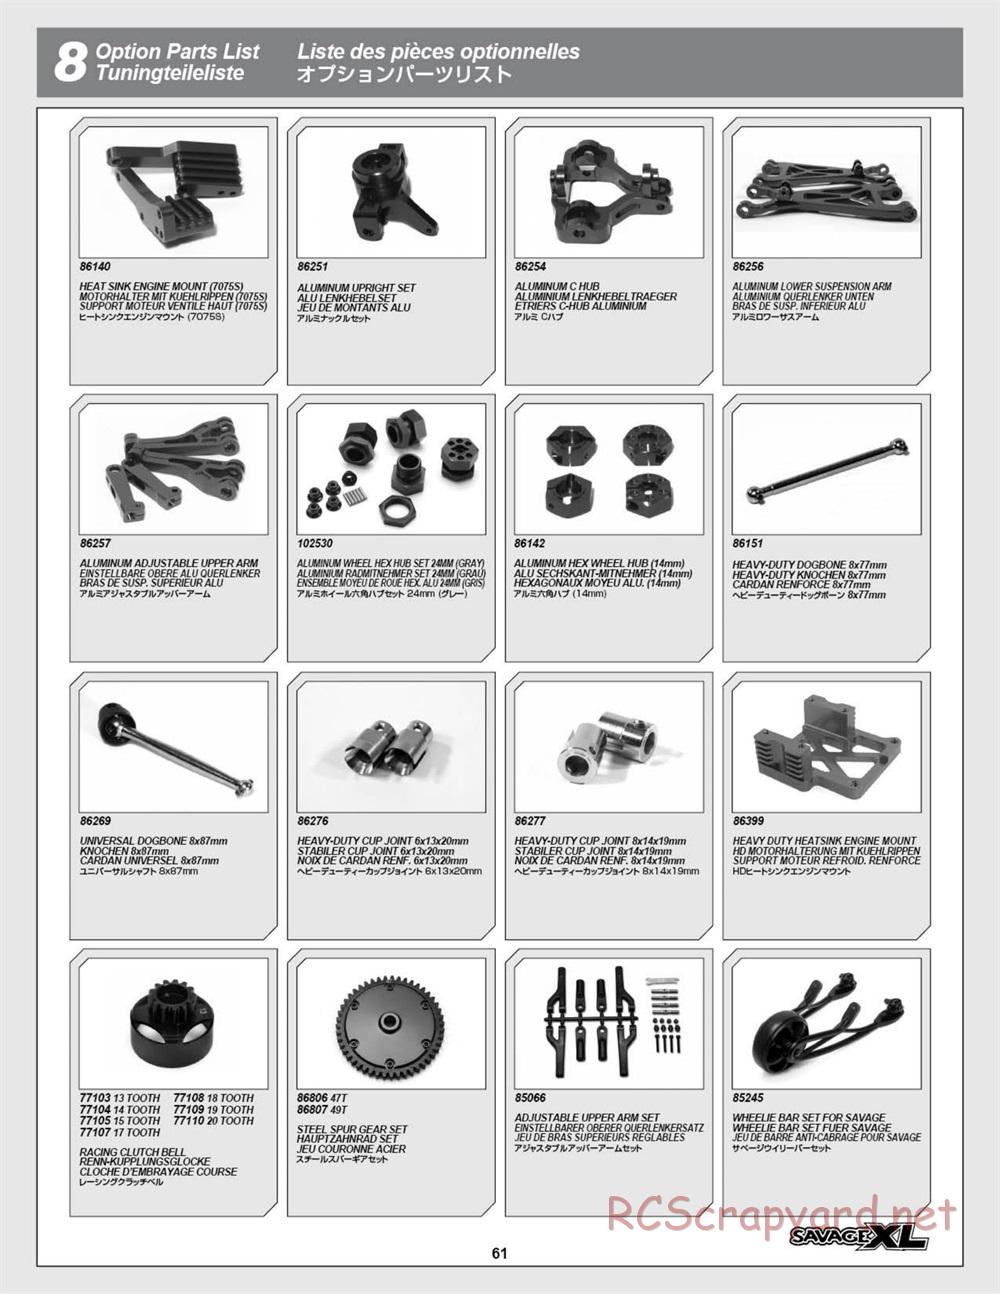 HPI - Savage XL 5.9 - Exploded View - Page 61